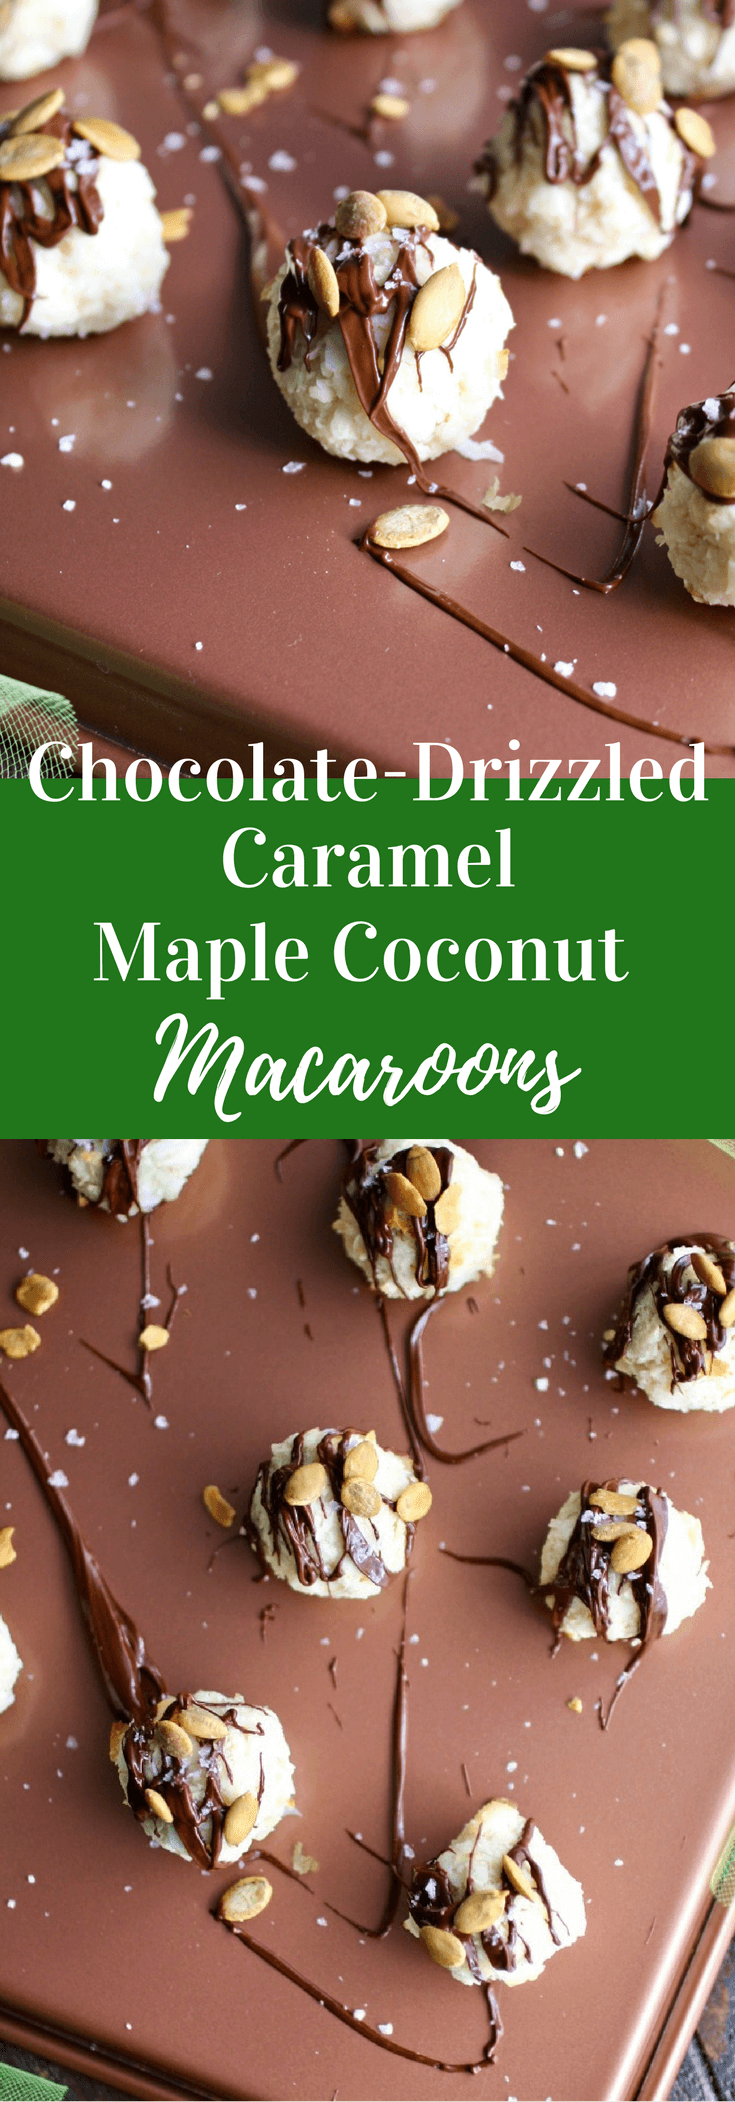 Perfect for the cookie platter: Chocolate-Drizzled Caramel Maple Coconut Macaroons!